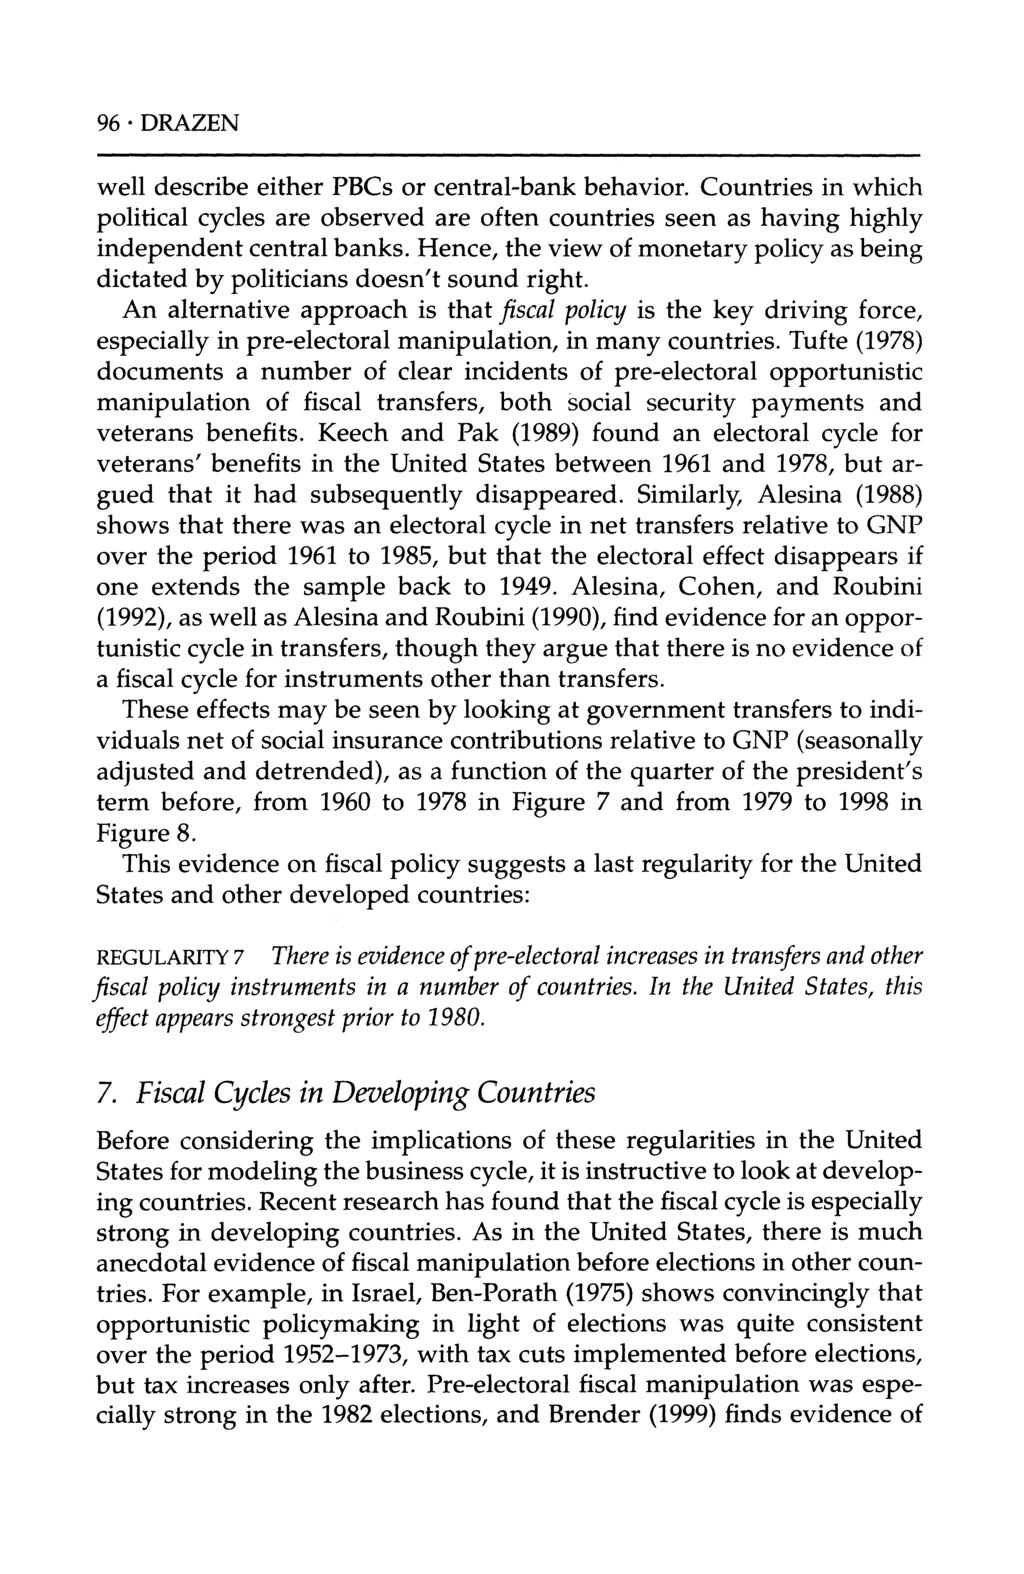 96 * DRAZEN well describe either PBCs or central-bank behavior. Countries in which political cycles are observed are often countries seen as having highly independent central banks.